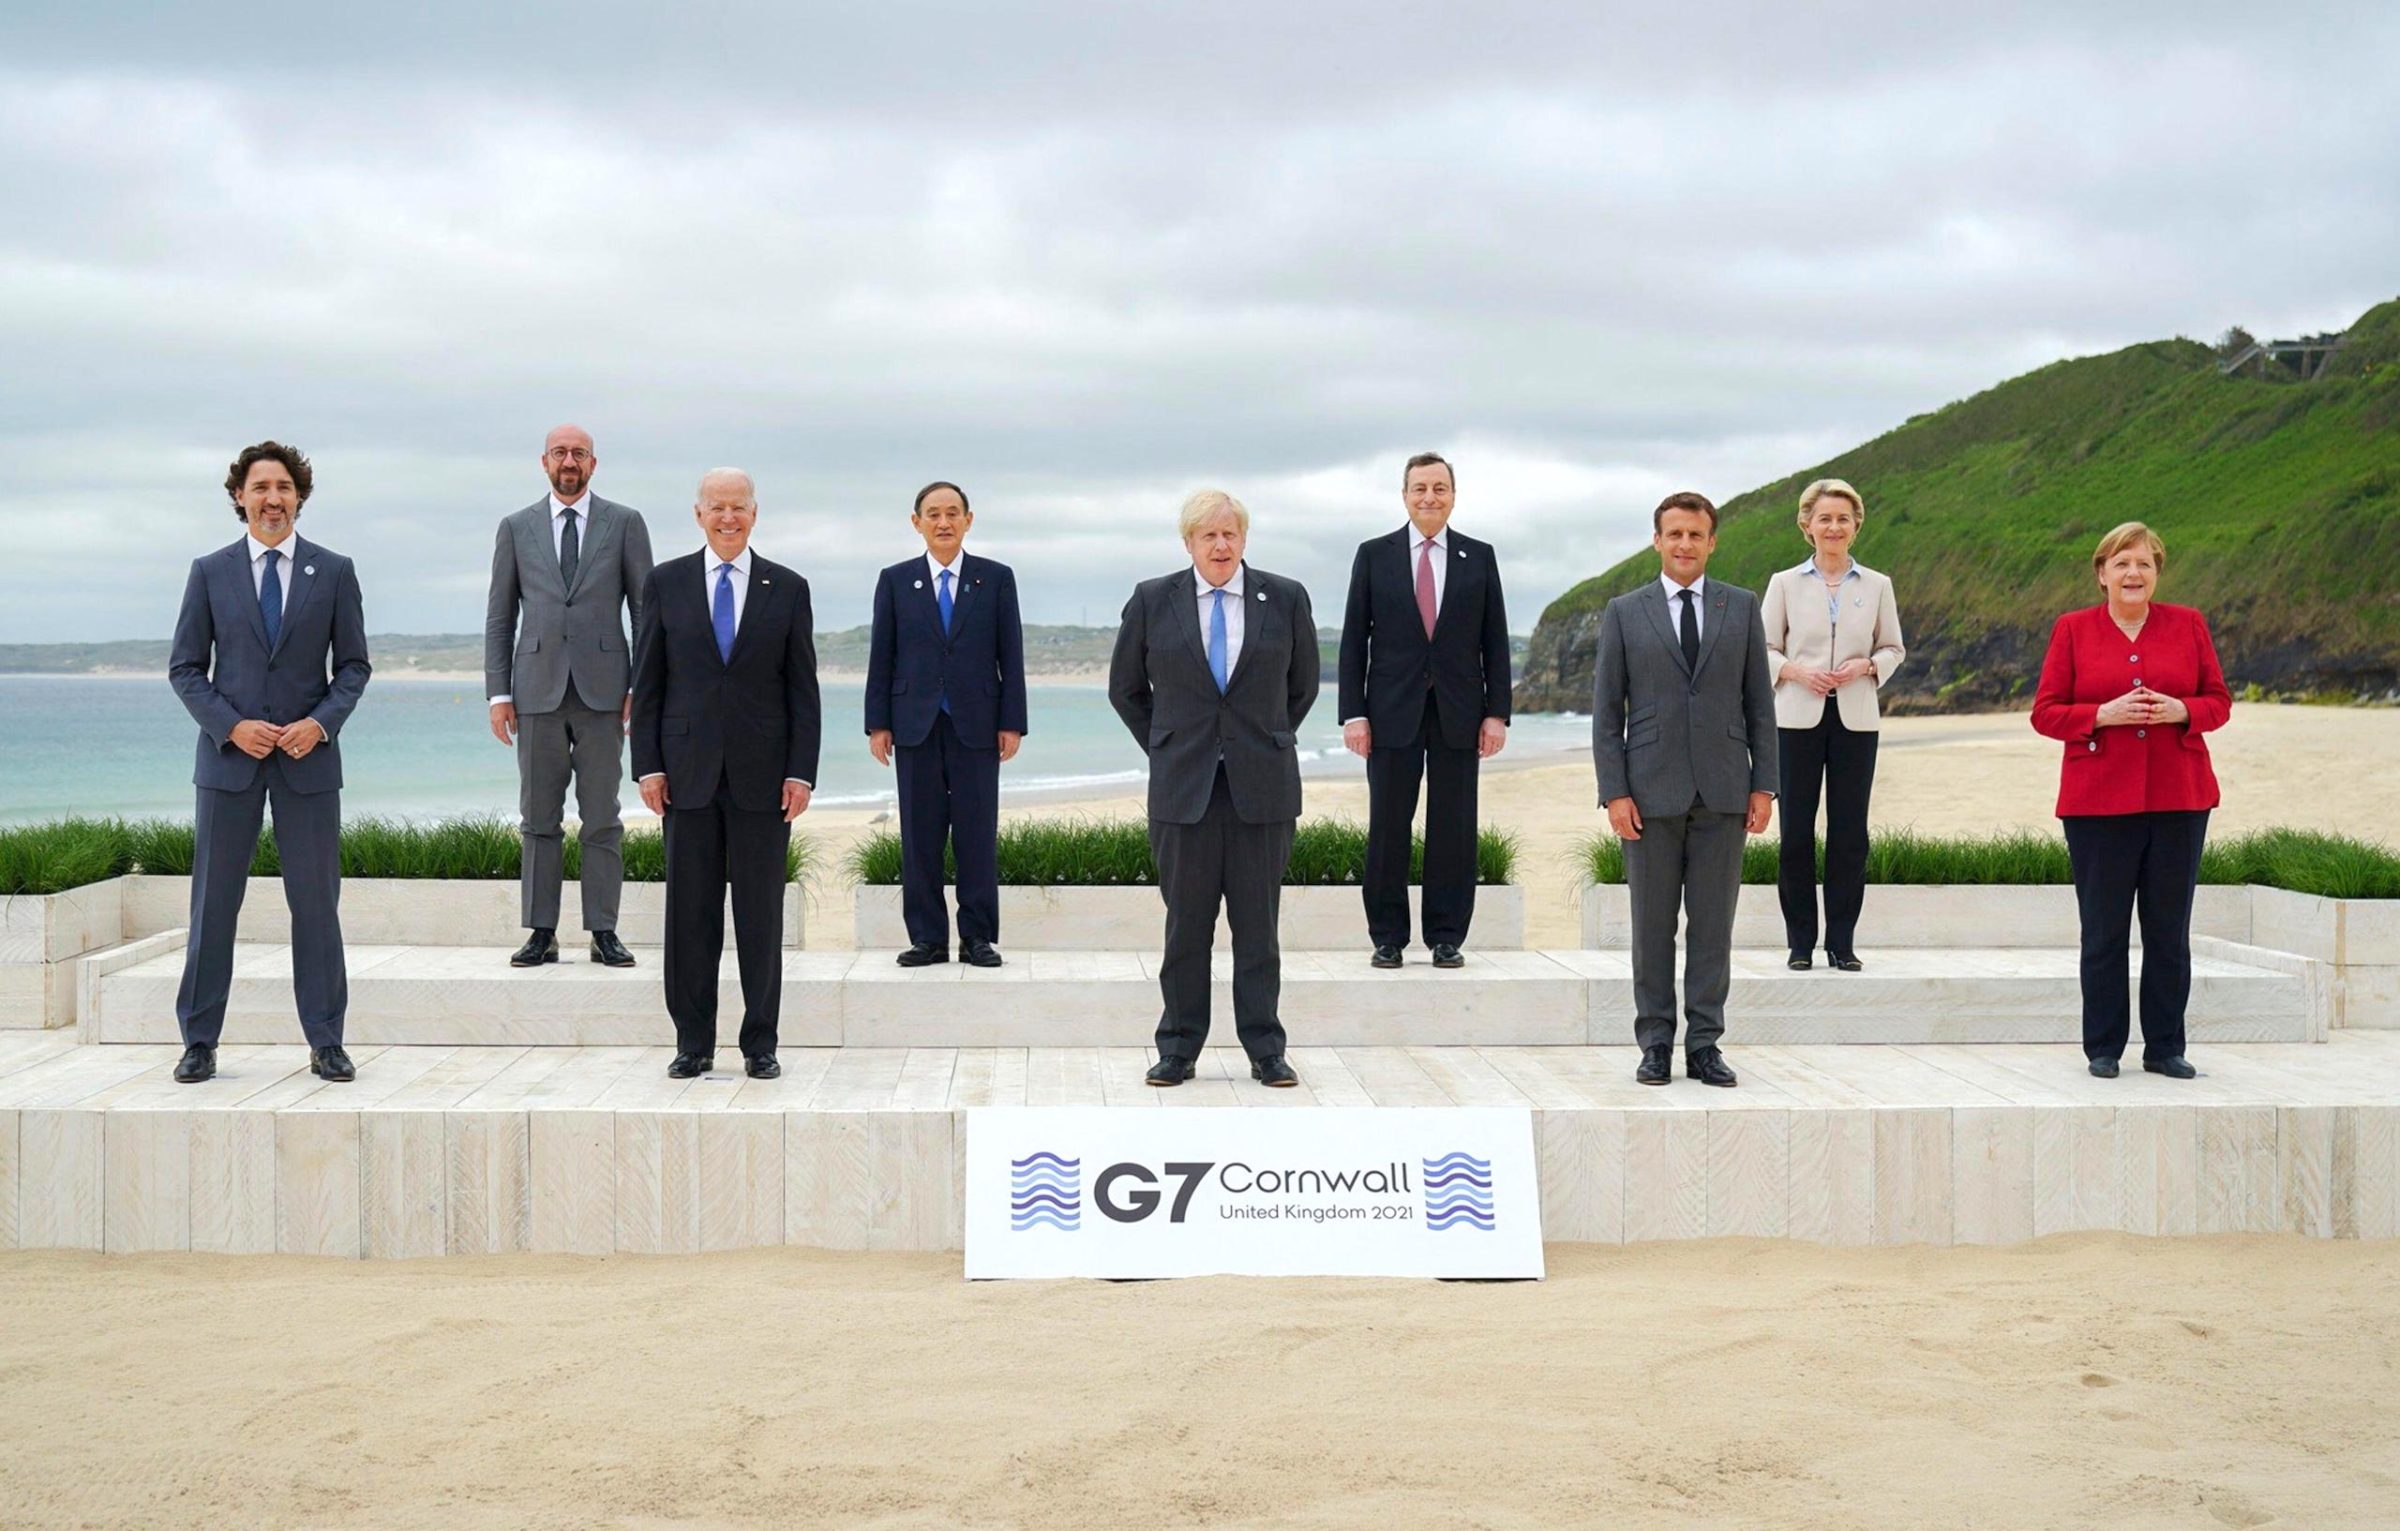 <p>G7 heads of state at the recent summit in Cornwall, UK (Image: Alamy)</p>